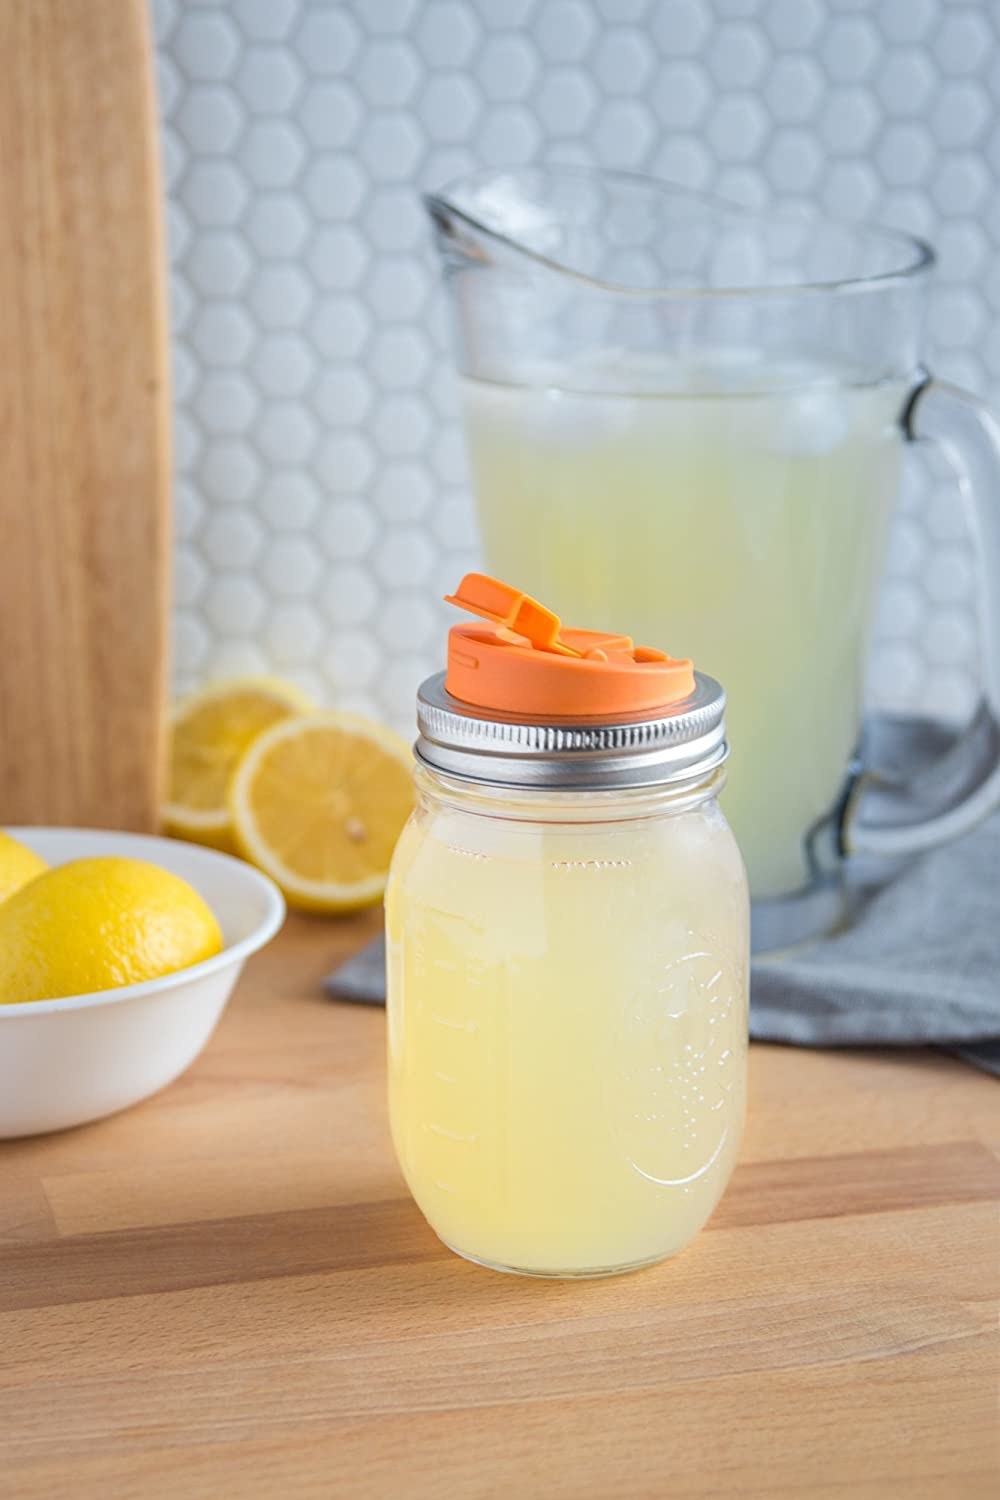 The lid is attached to a Mason jar full of lemonade